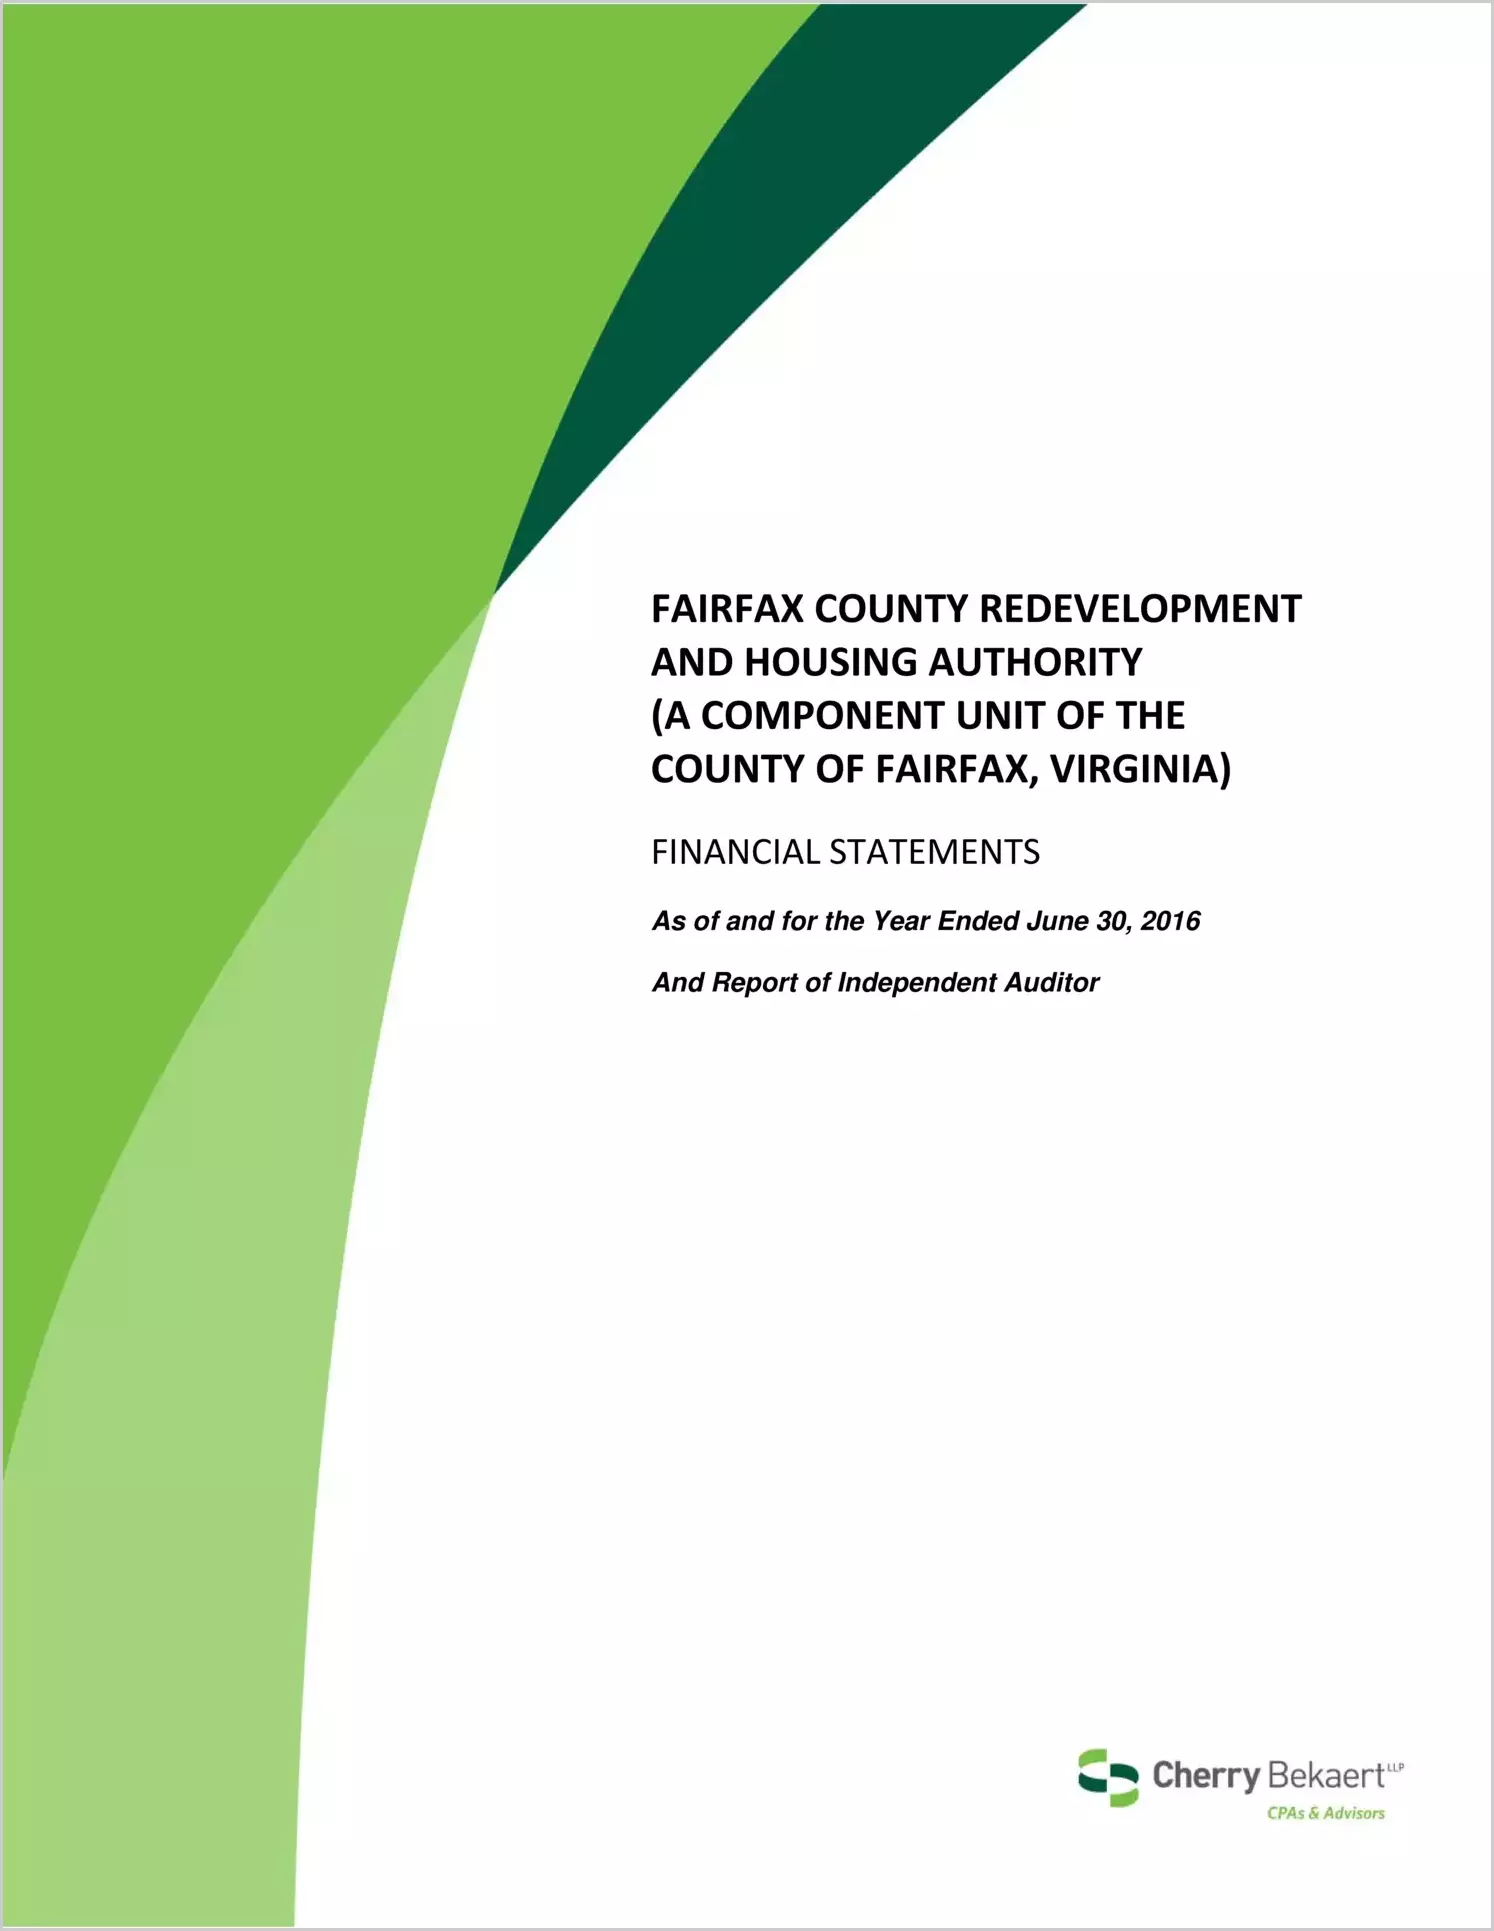 2016 ABC/Other Annual Financial Report  for Fairfax County Redevelopment & Housing Authority